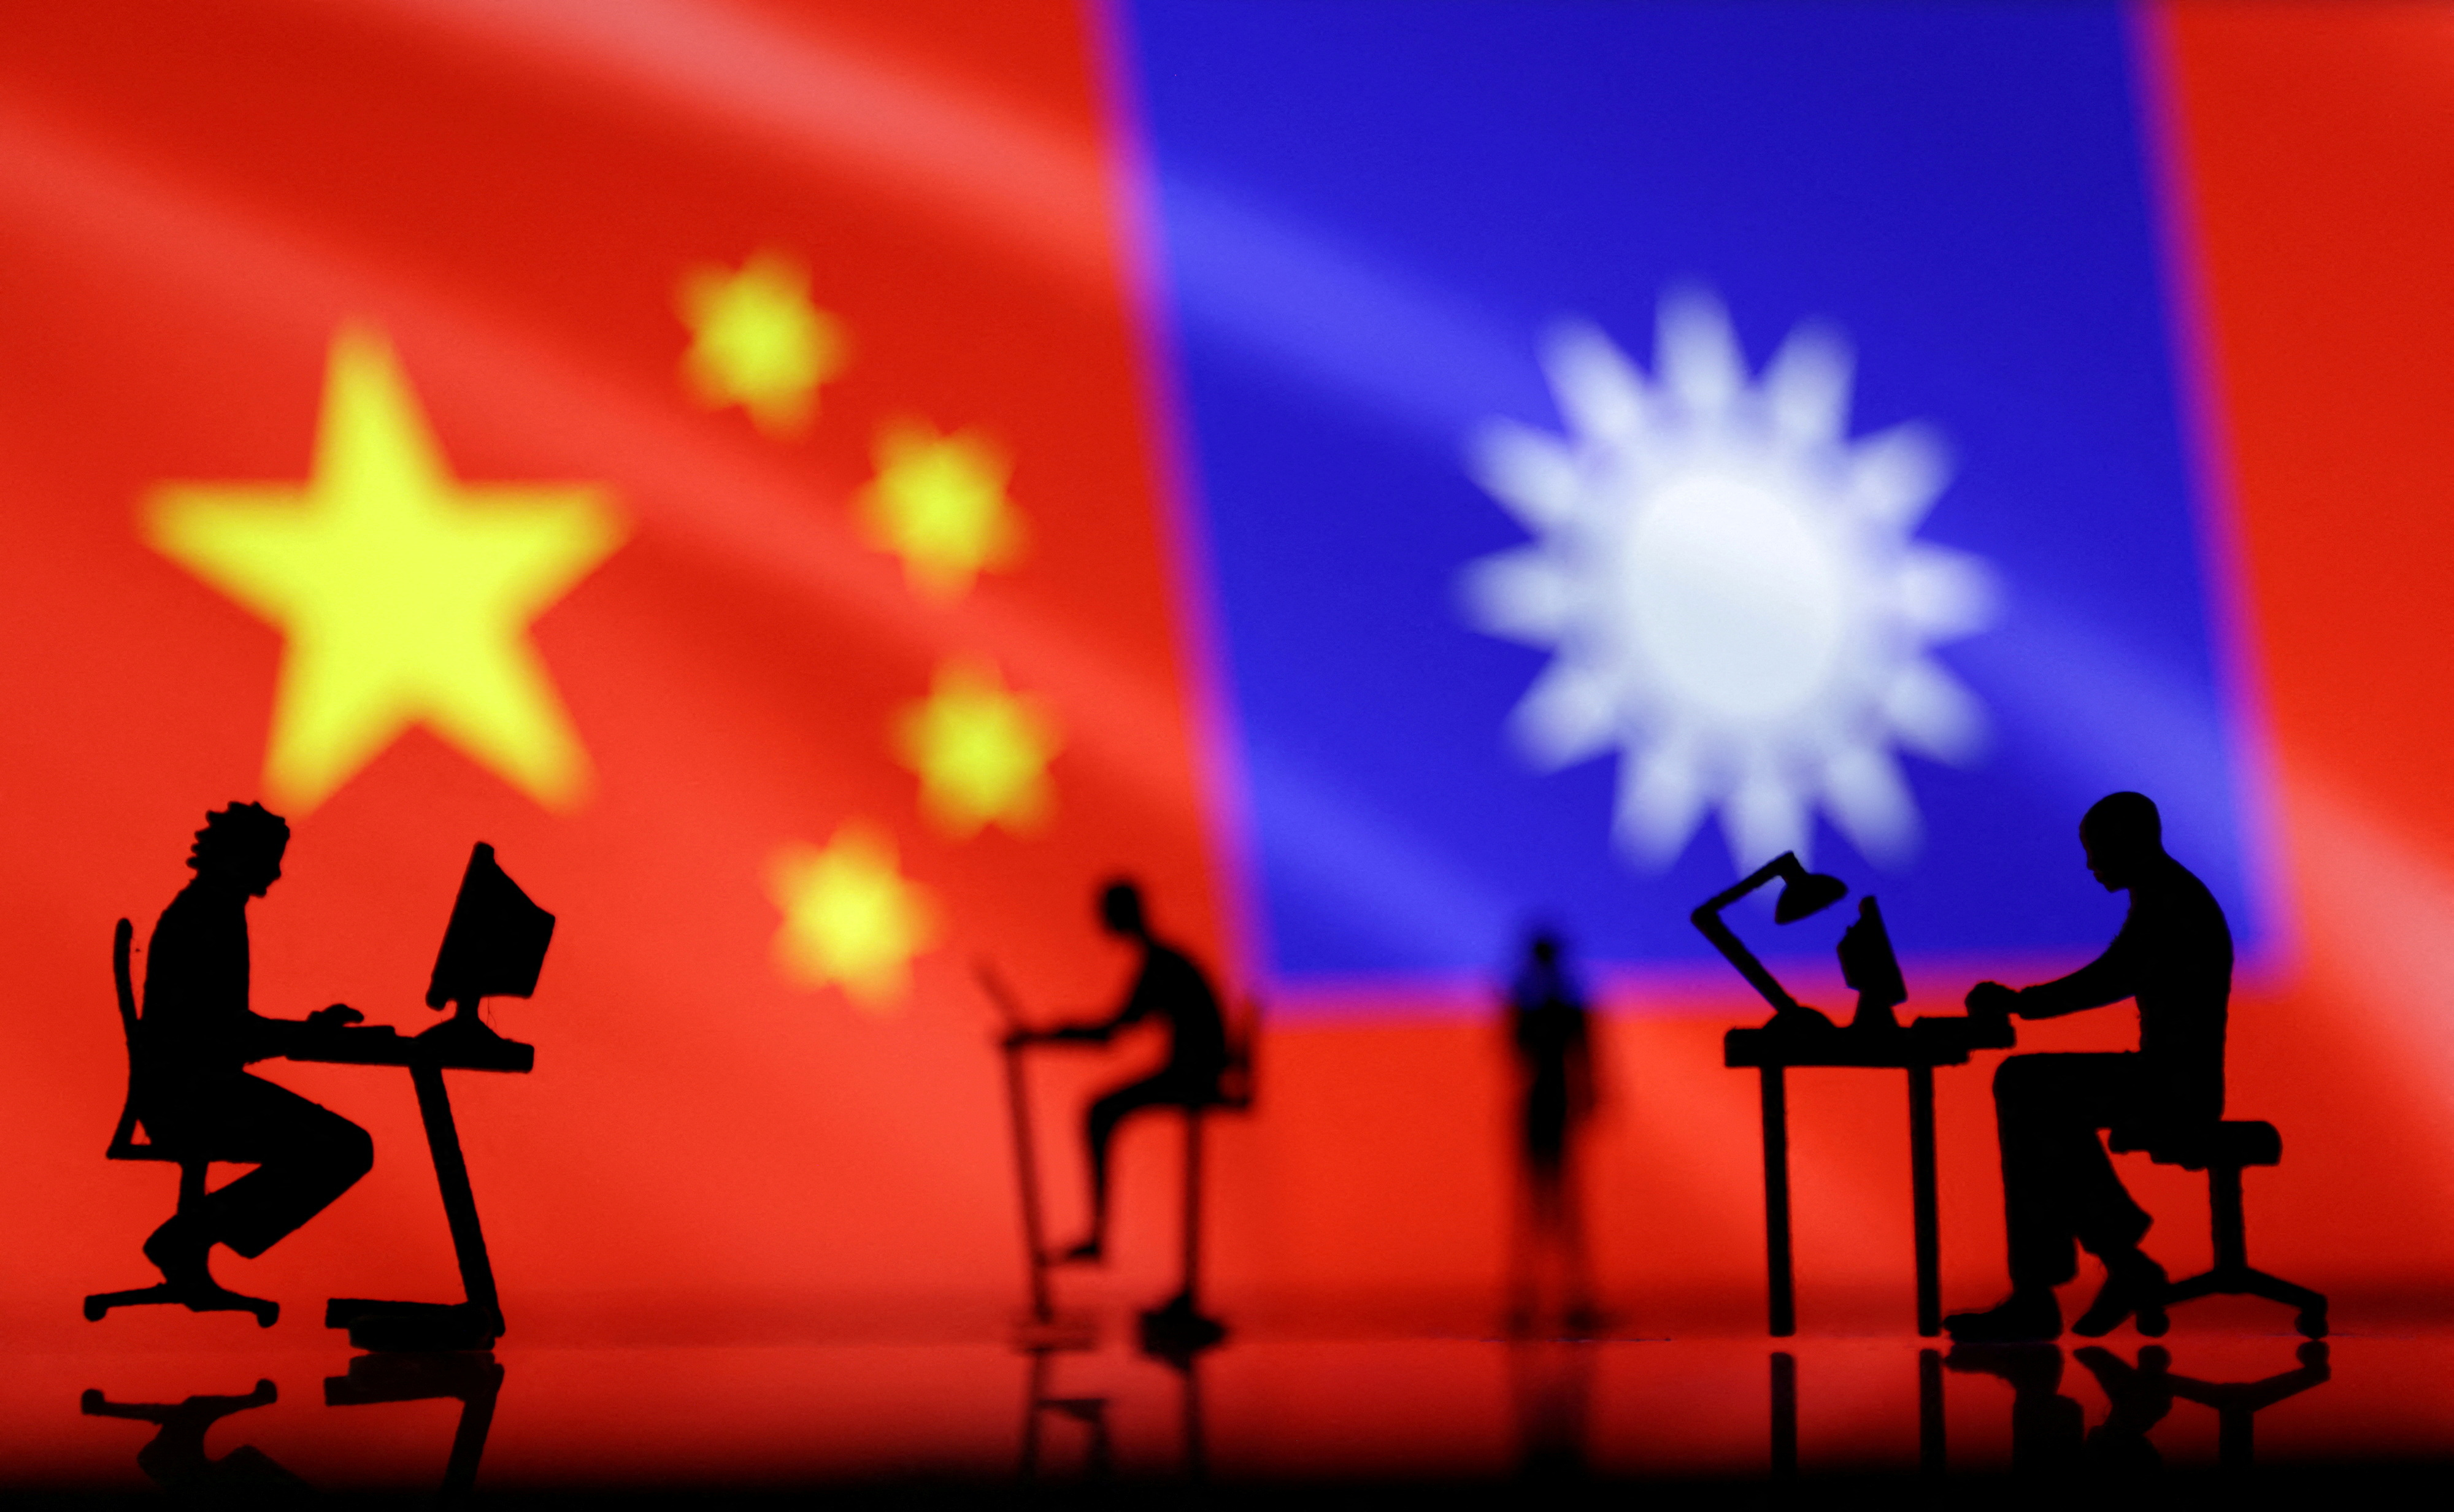 Illustration shows small figurines with computers, Chinese and Taiwanese flags